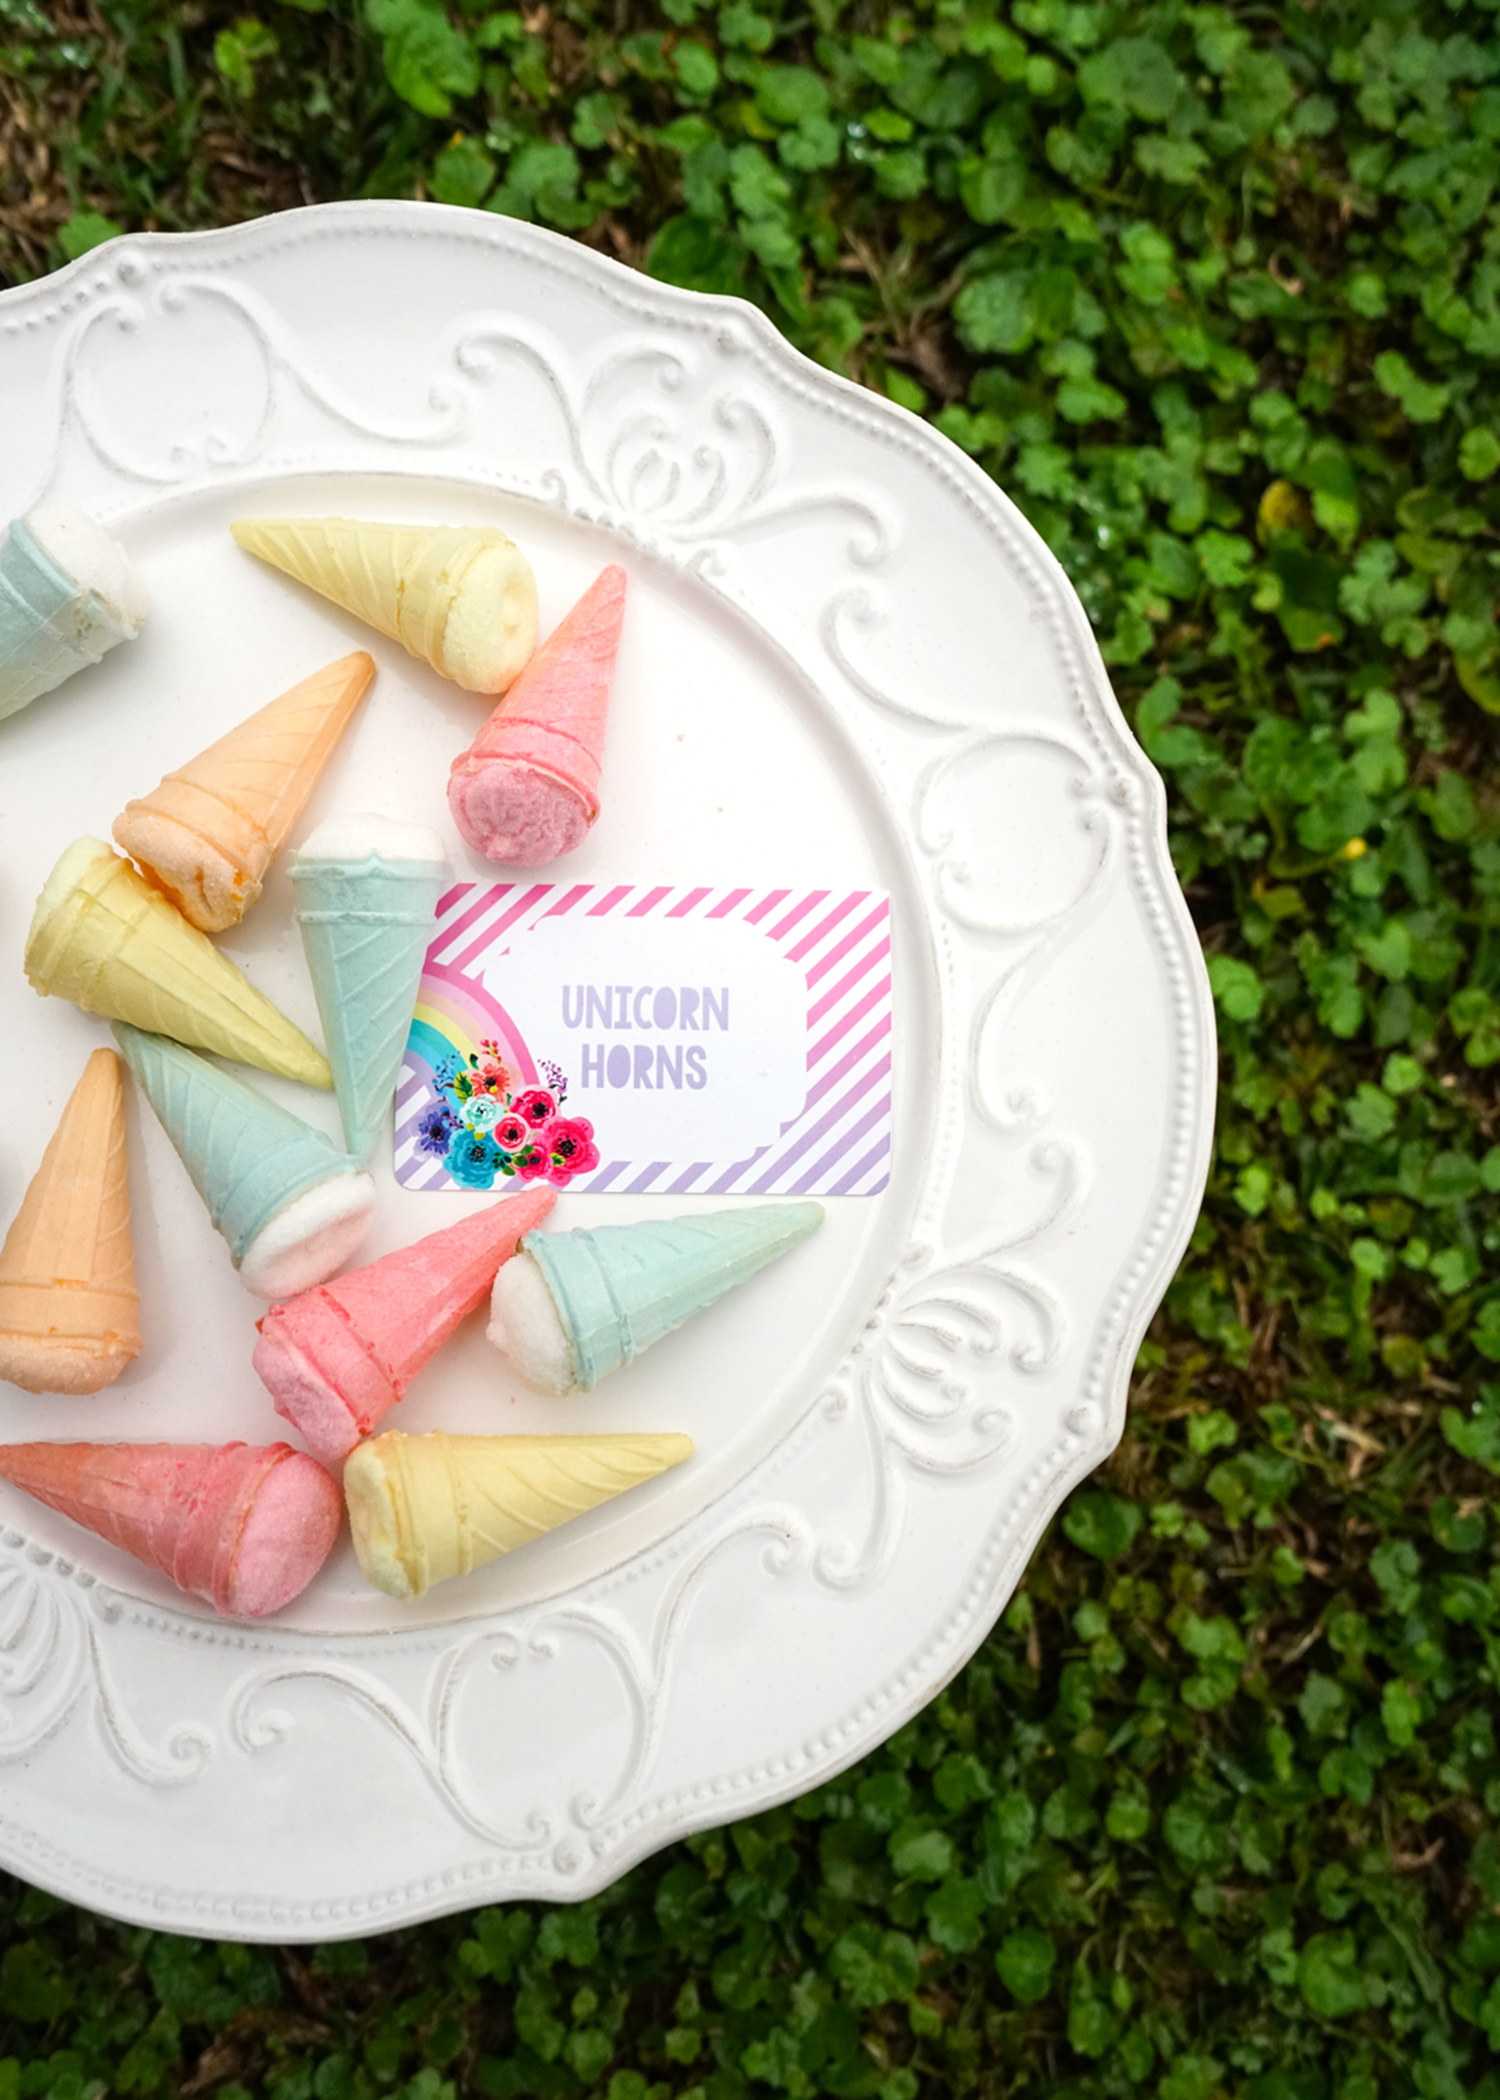 Mini marshmallow ice cream cones with a food label 'Unicorn Horns' for a unicorn party food plate!